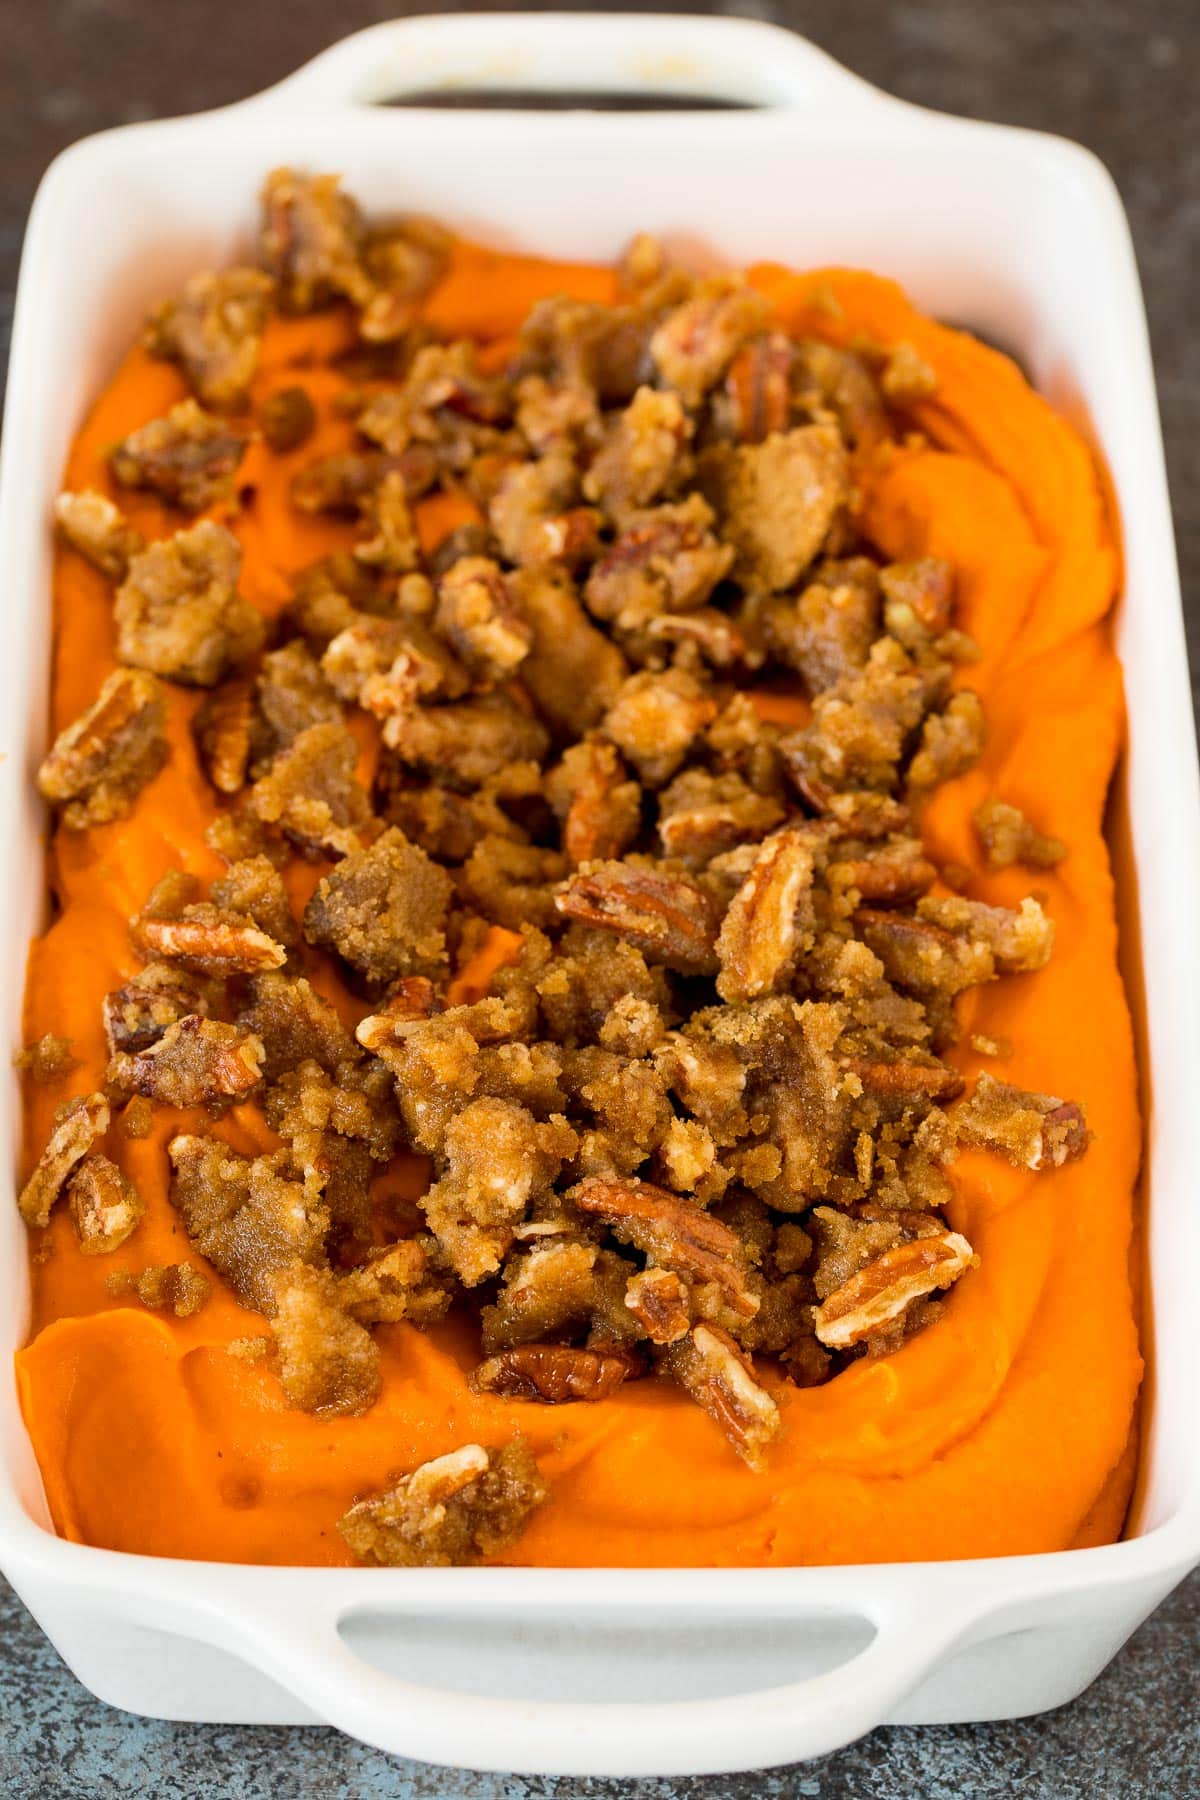 Pureed sweet potatoes in a dish with brown sugar and pecans on top.